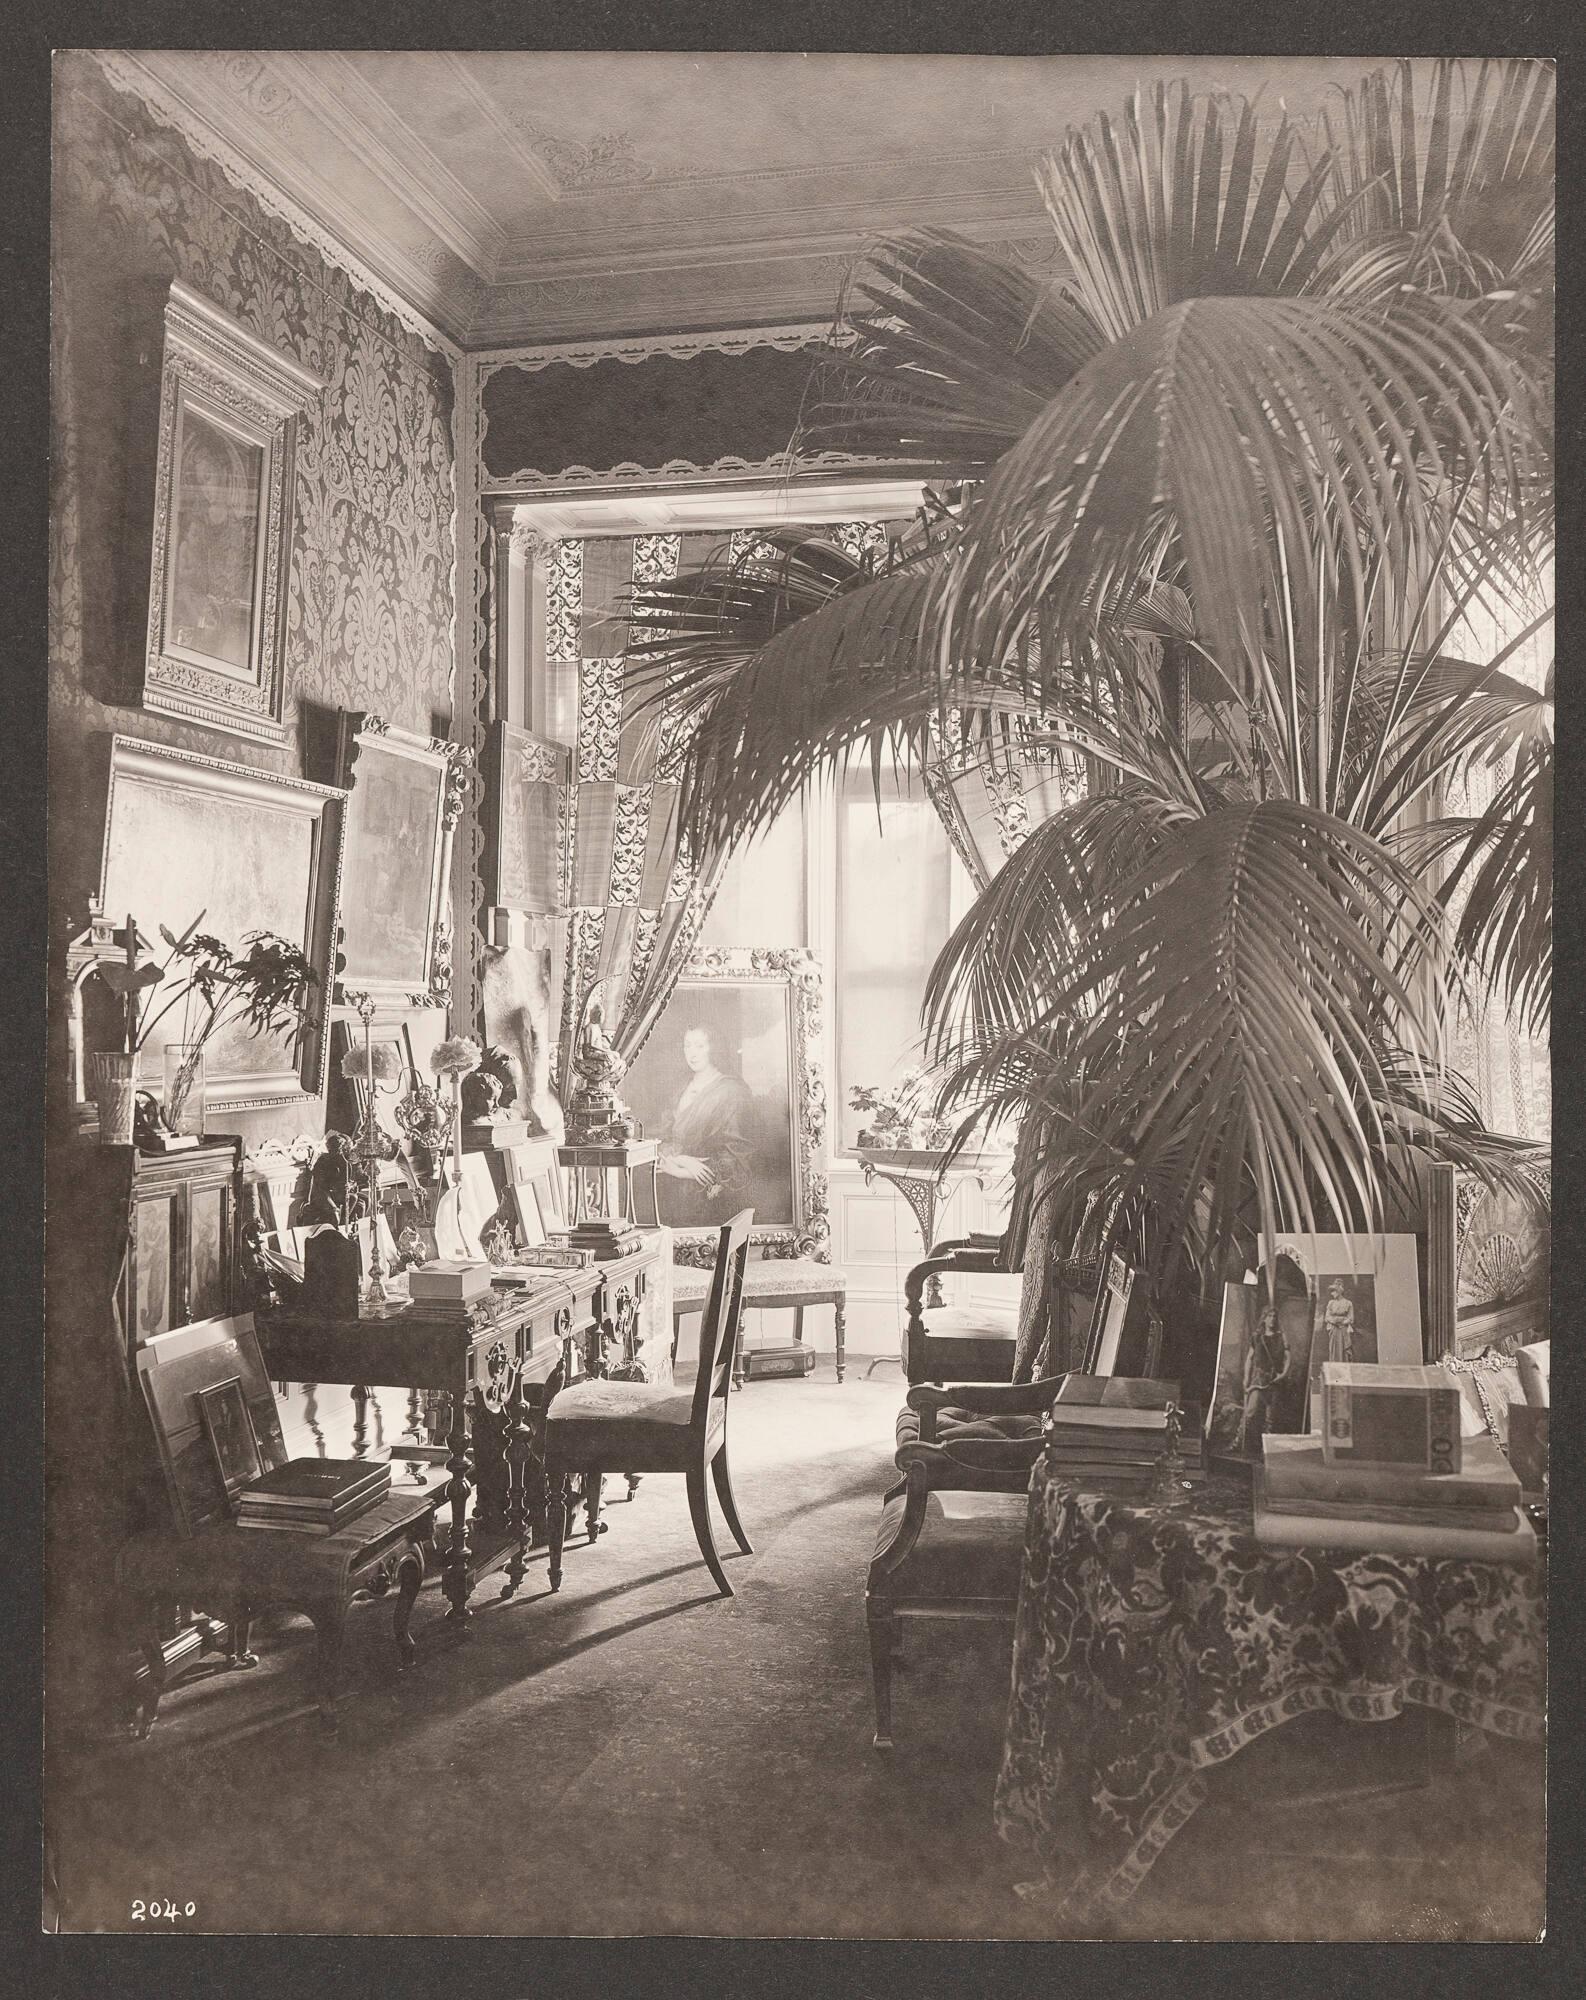 Opulent 19th century domestic interior of Isabella Stewart Gardner’s home crowded with paintings, furniture and decorative arts. The room is dominated by a large potted plant. Paintings line the damask upholstered walls. A round table covered in a velvet floral textile in the foreground is decorated with photographs of musicians and actors and stacks of books.